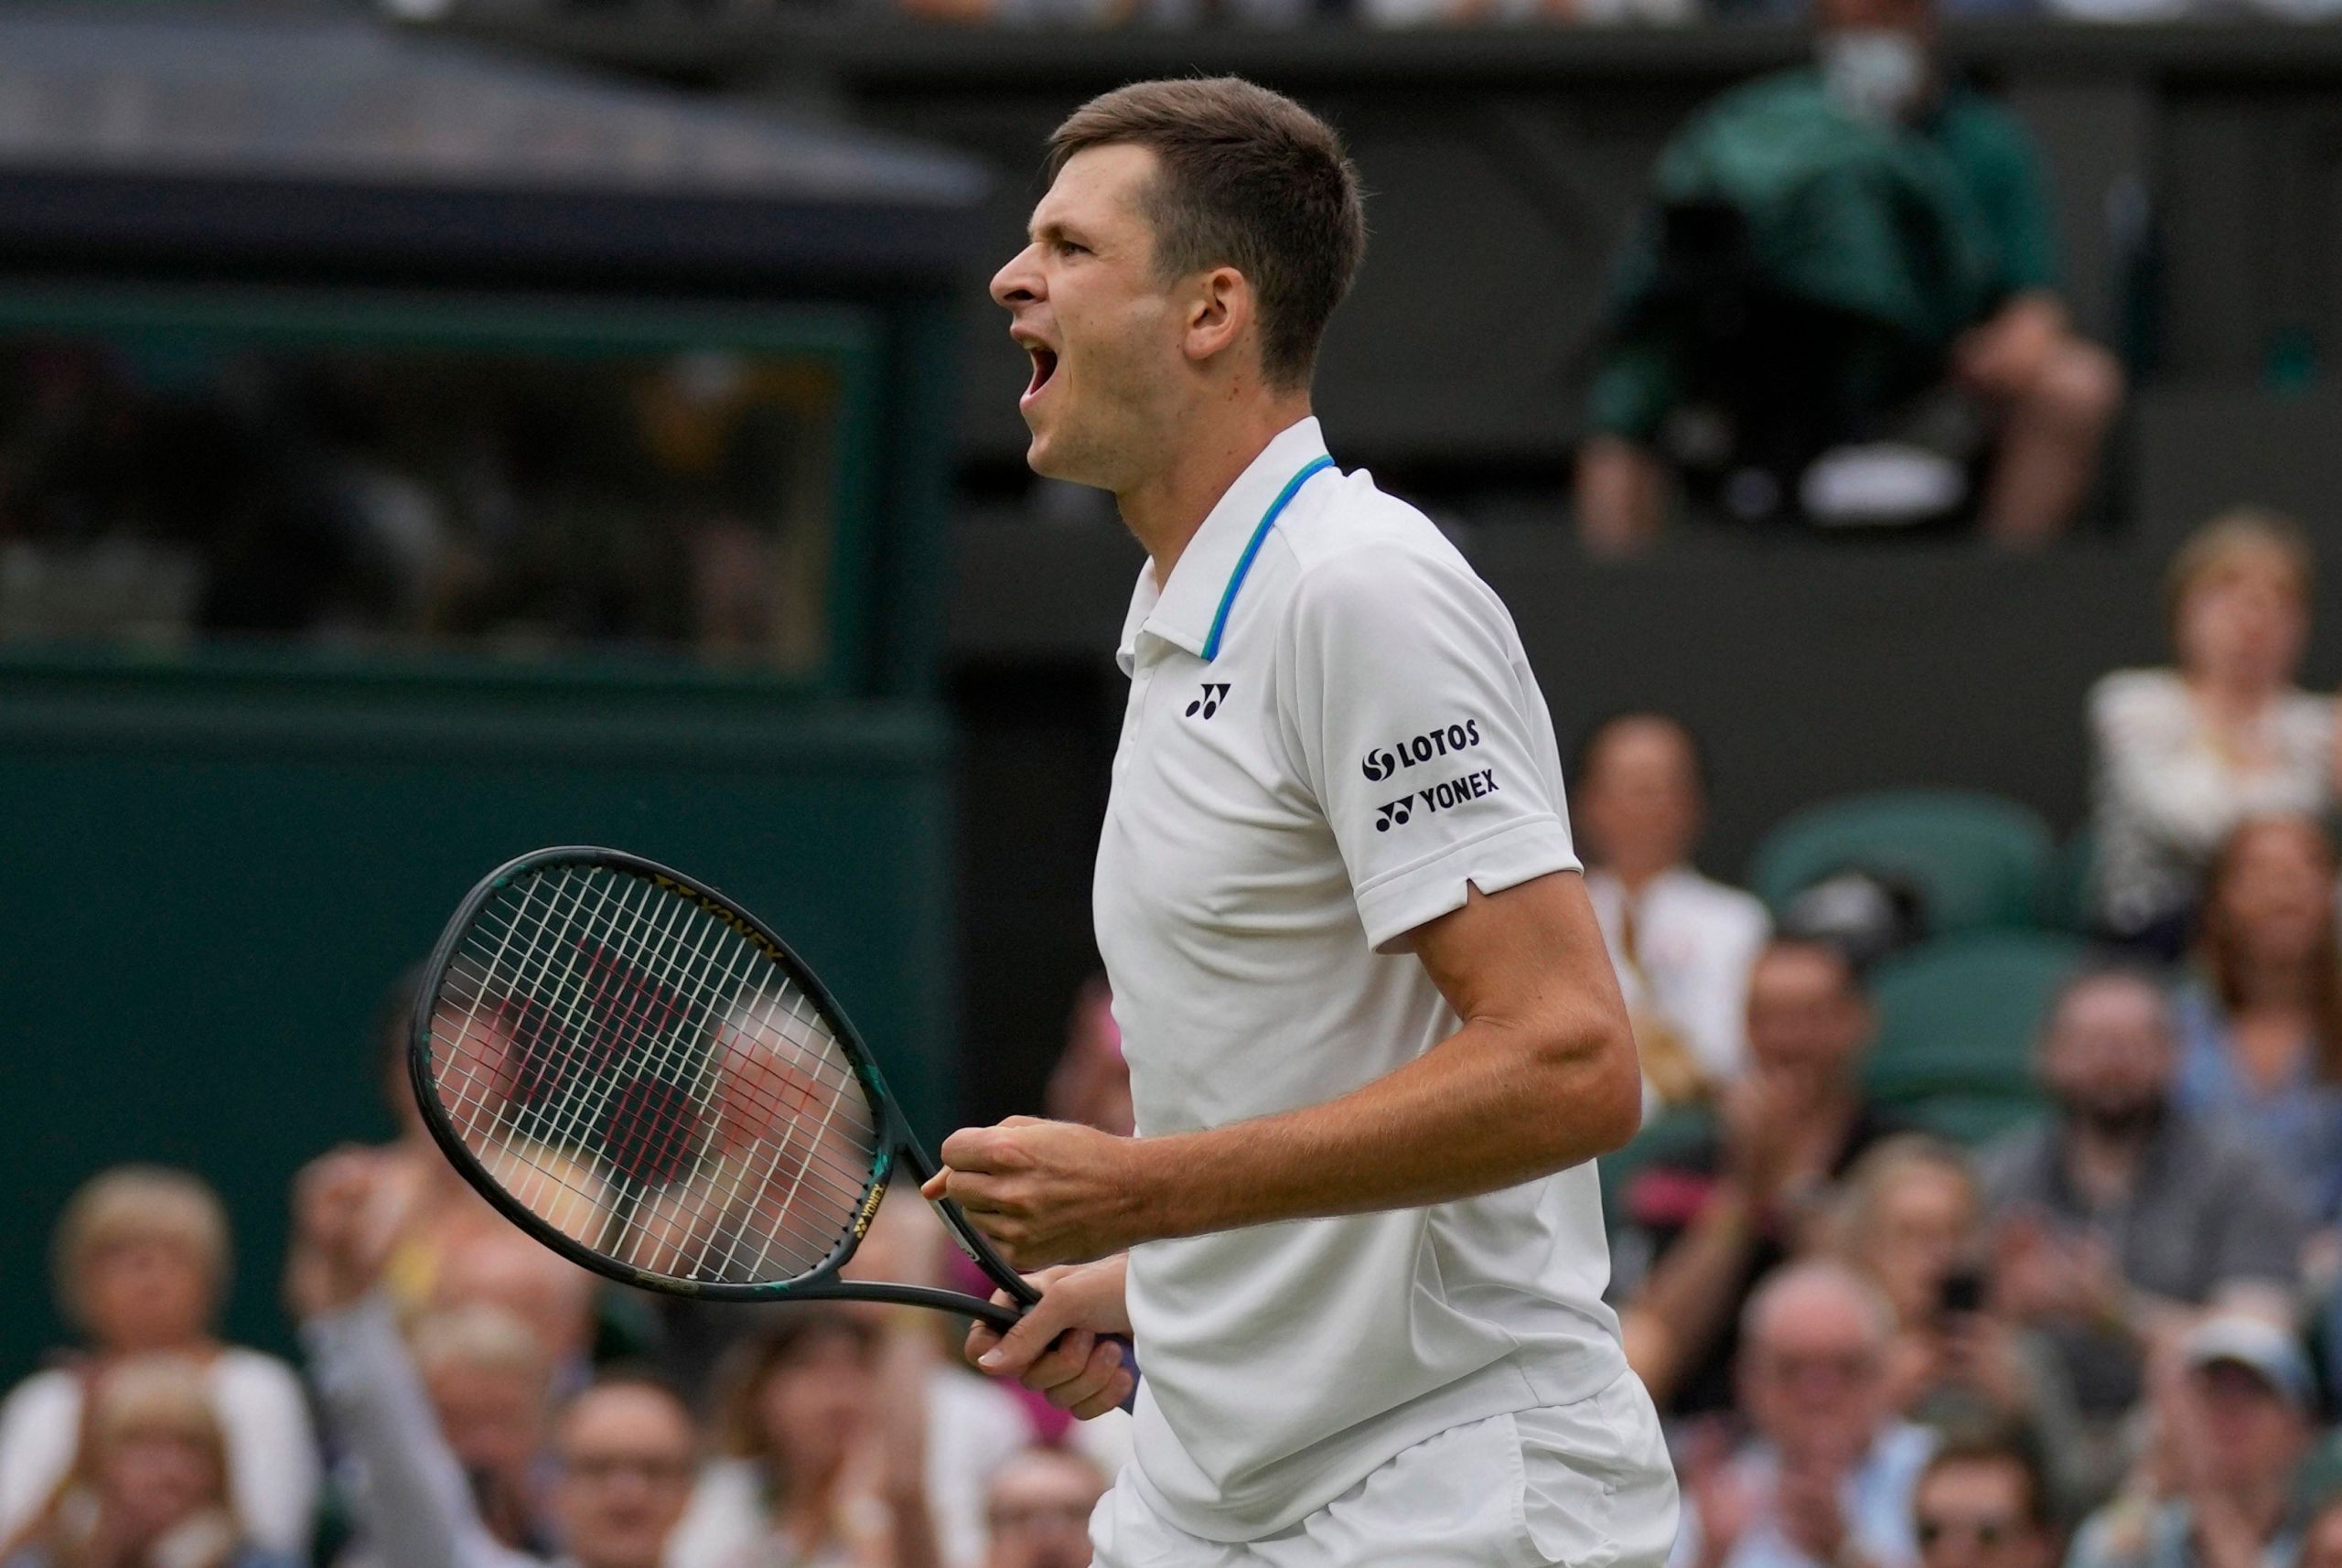 Hubert Hurkacz, the 24-year-old who knocked out Roger Federer at Wimbledon